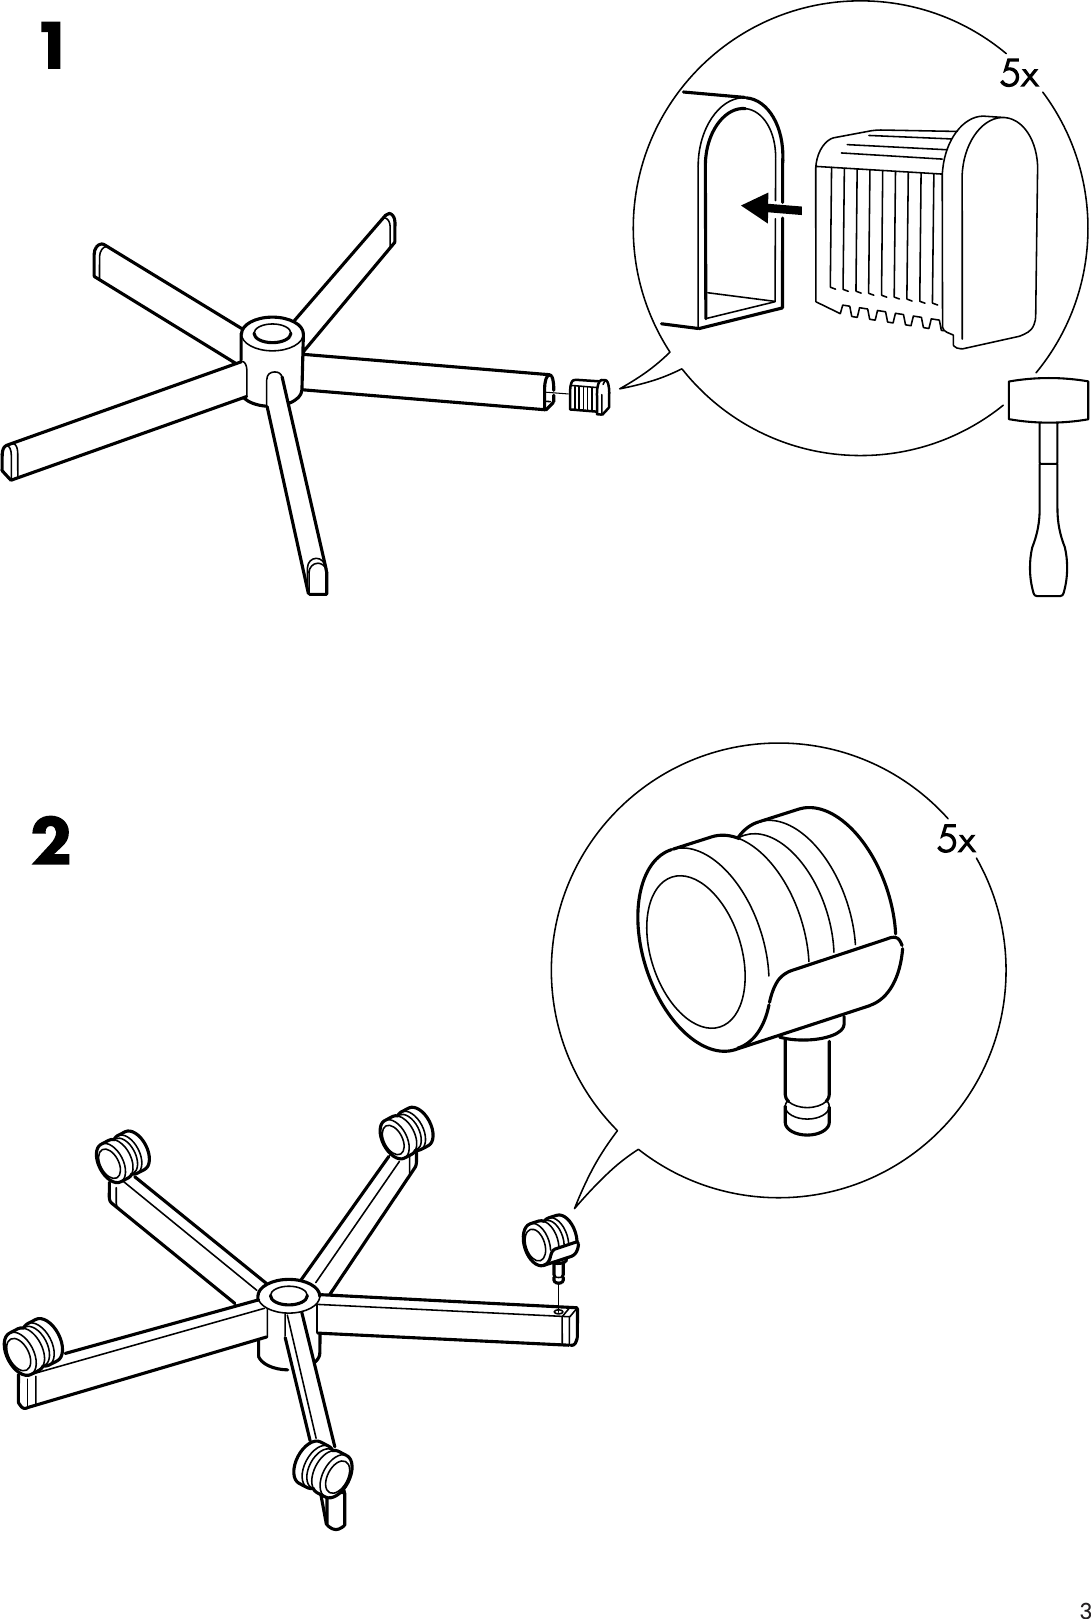 Page 3 of 8 - Ikea Ikea-Snille-Swivel-Chair-Frame-Assembly-Instruction